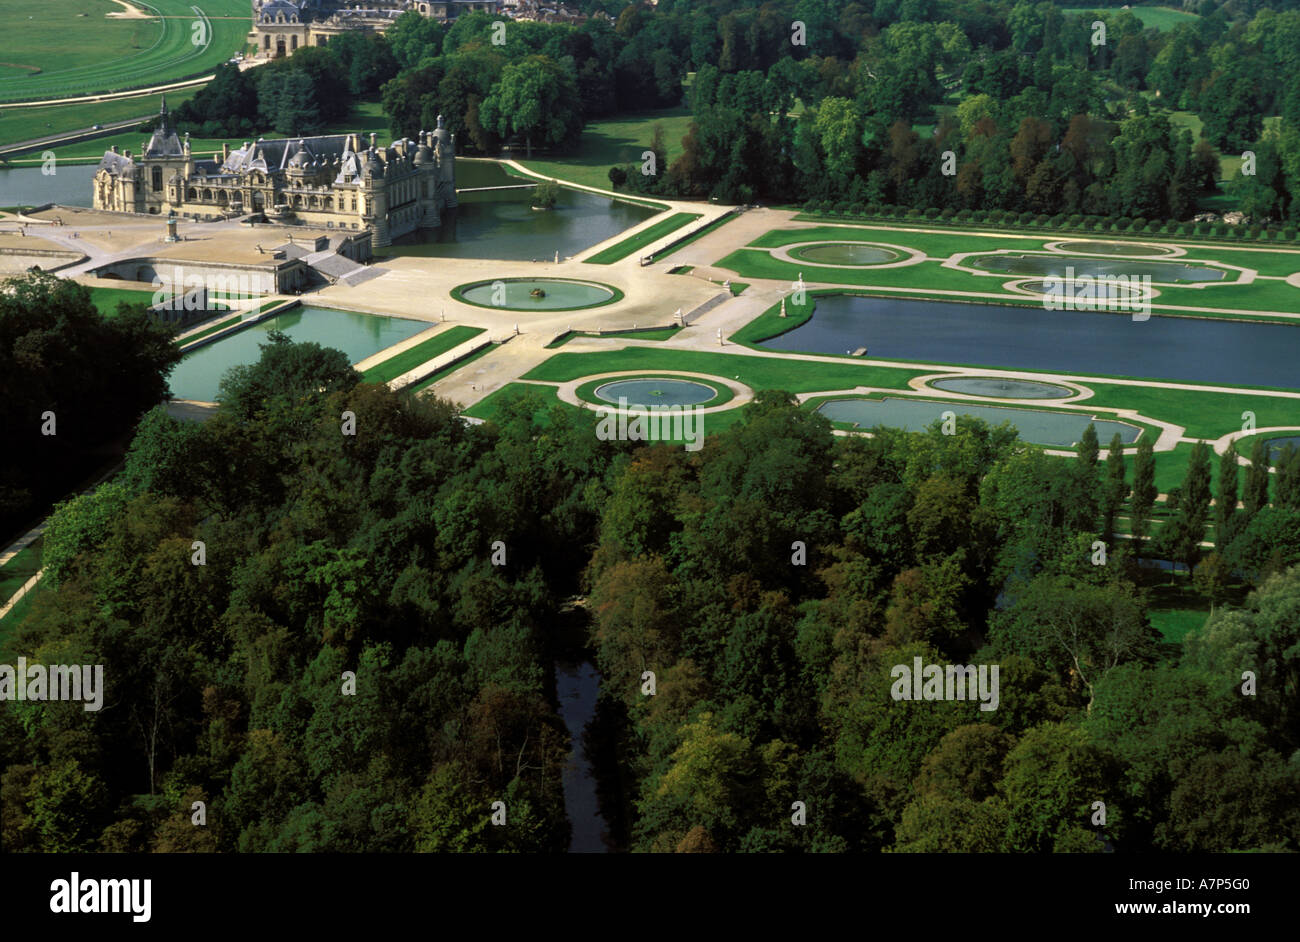 France, Oise, Chateau de Chantilly, formal garden designed by Le Notre  (aerial view Stock Photo - Alamy